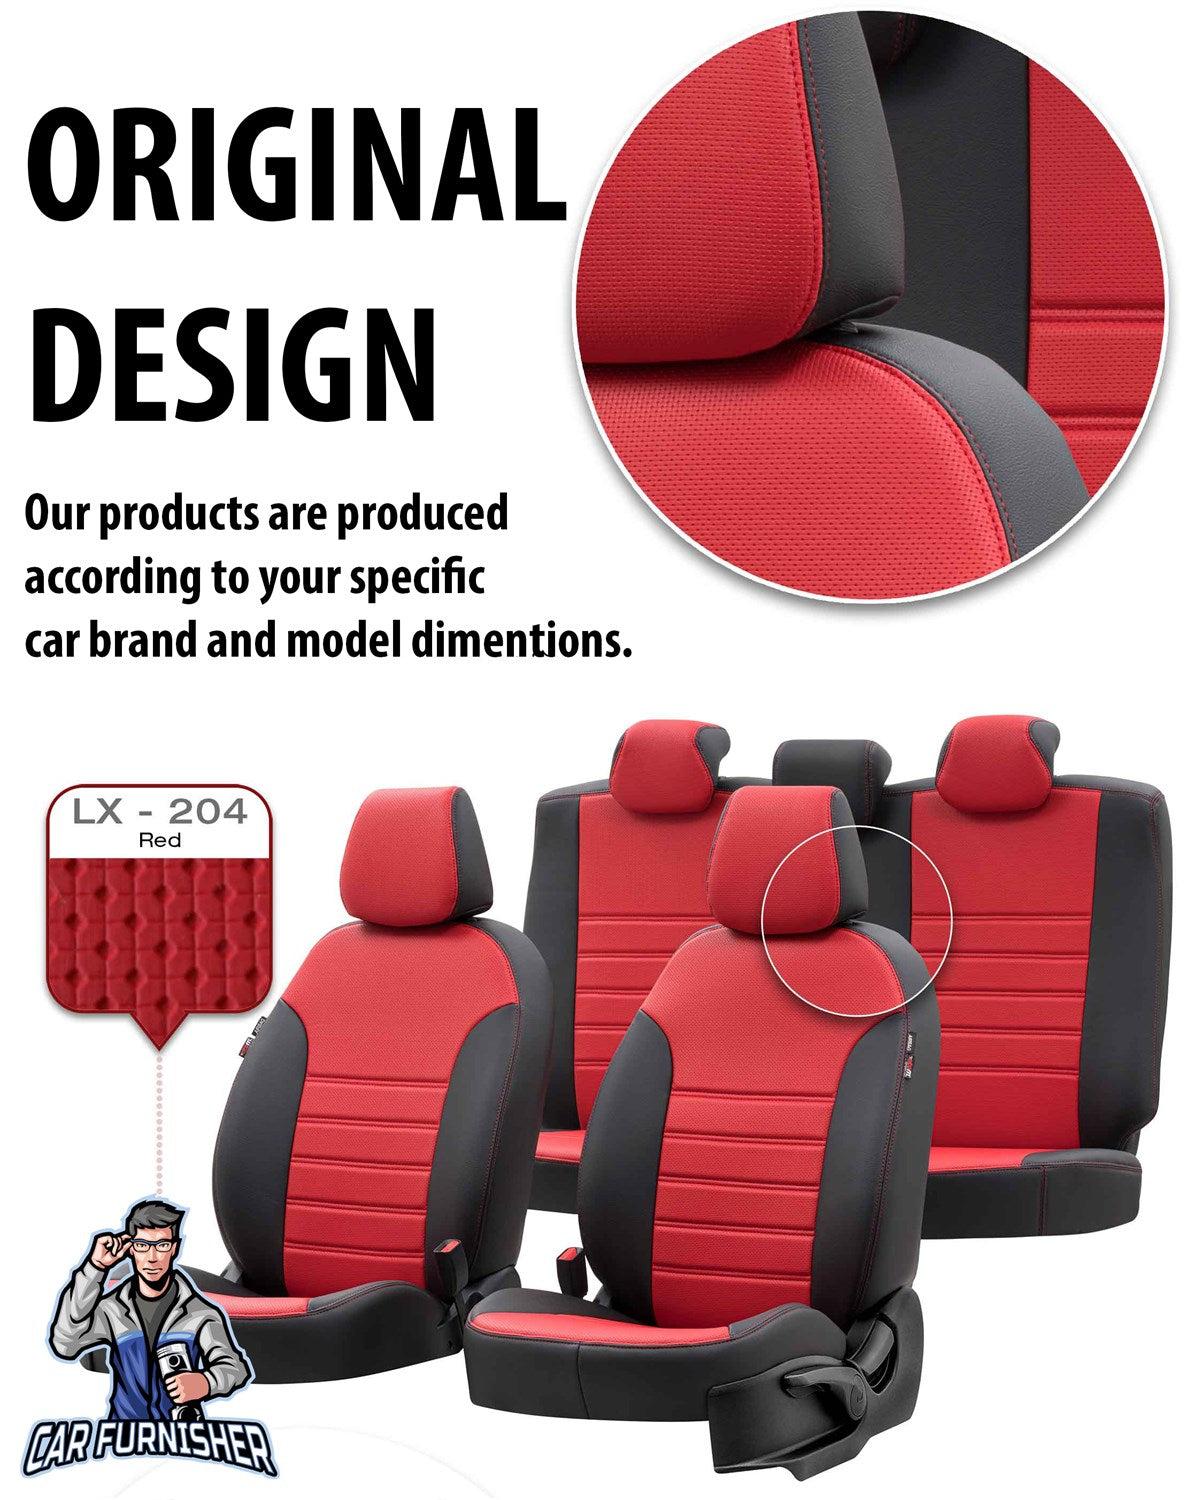 Jeep Grand Cherokee Seat Cover New York Leather Design Smoked Black Leather